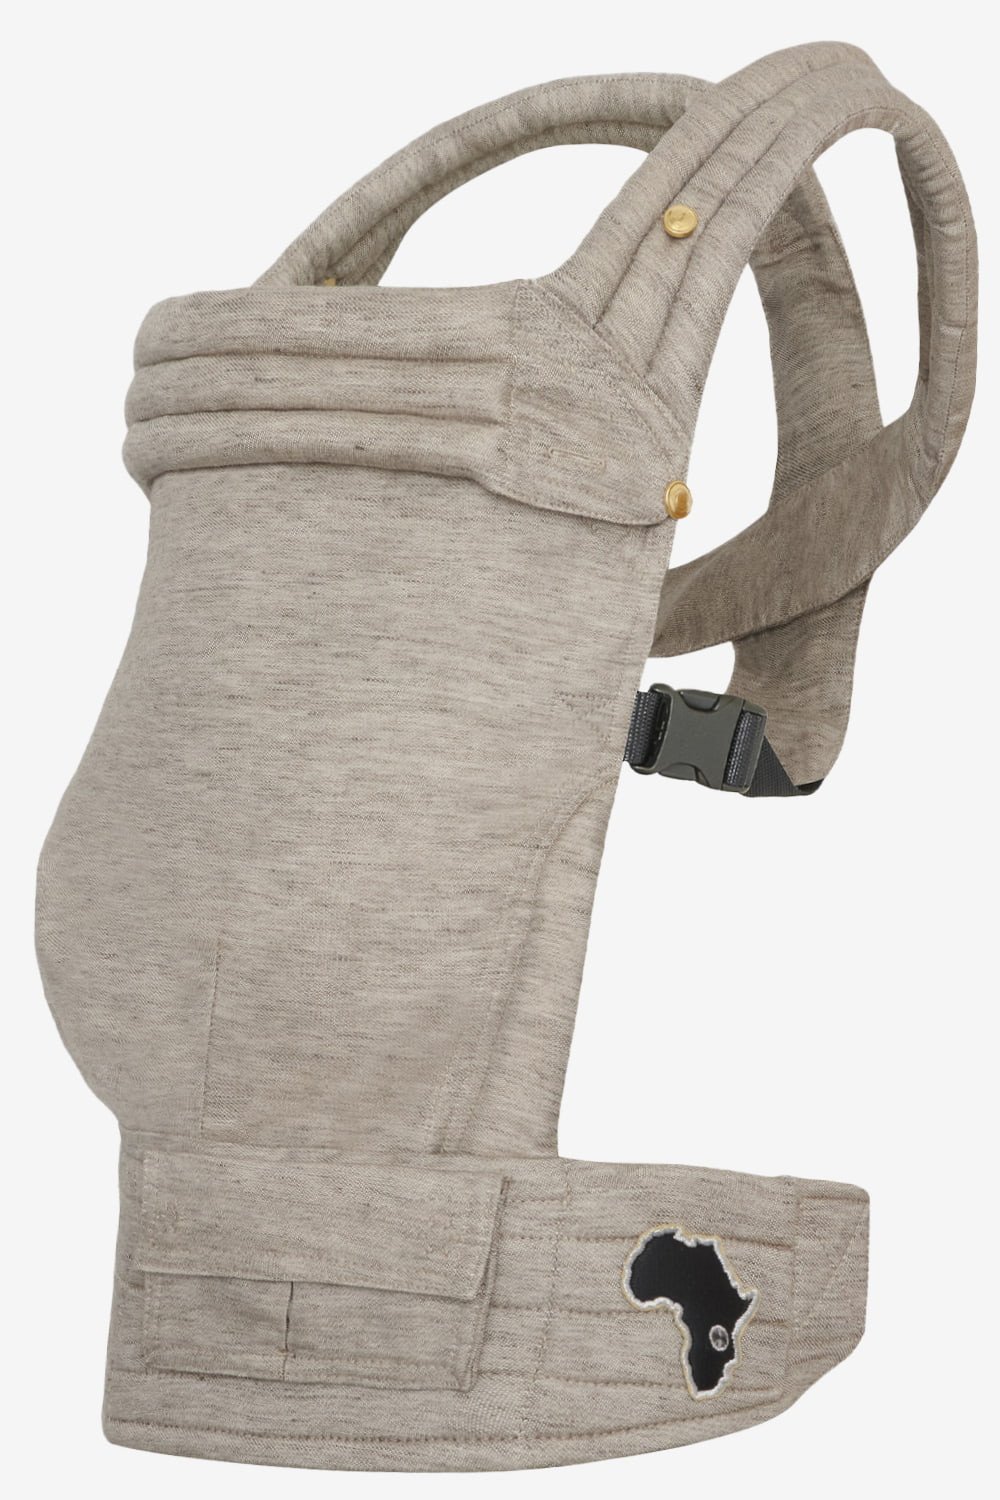 Taupe Jane Goodall baby carrier in a linen blend